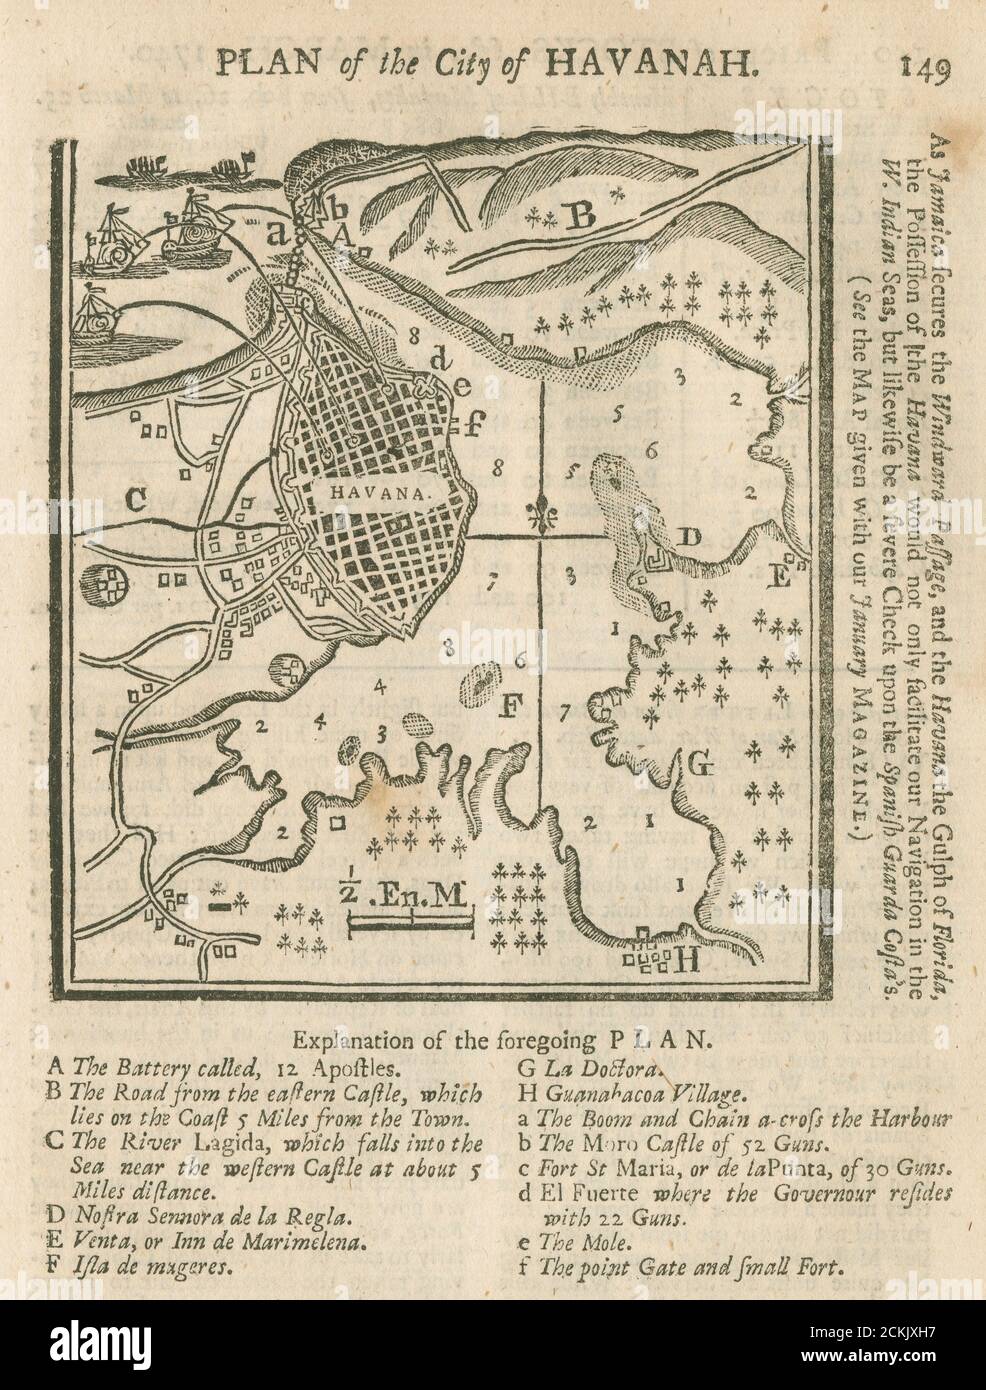 Engraving “Plan of the City of Havanah” from The Gentleman’s Magazine, March, 1740 with possible bombardment scenario from the sea. SOURCE: ORIGINAL MAGAZINE Stock Photo